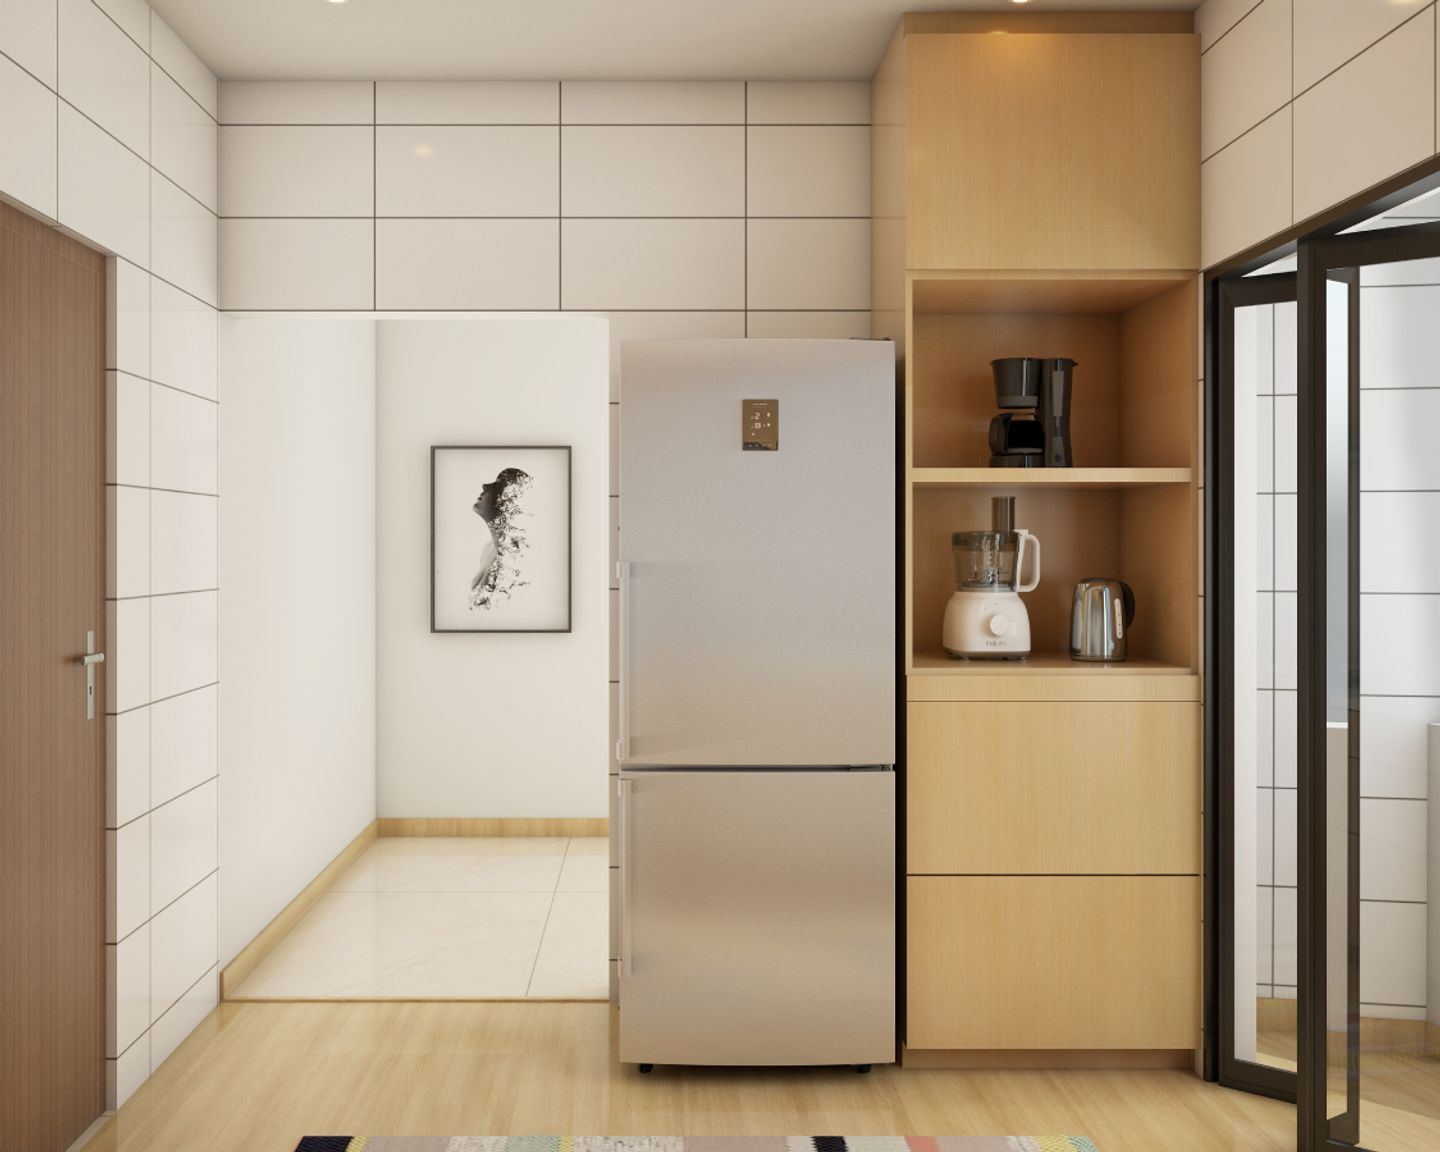 Contemporary Design For Kitchens With Beige Storage Cabinets